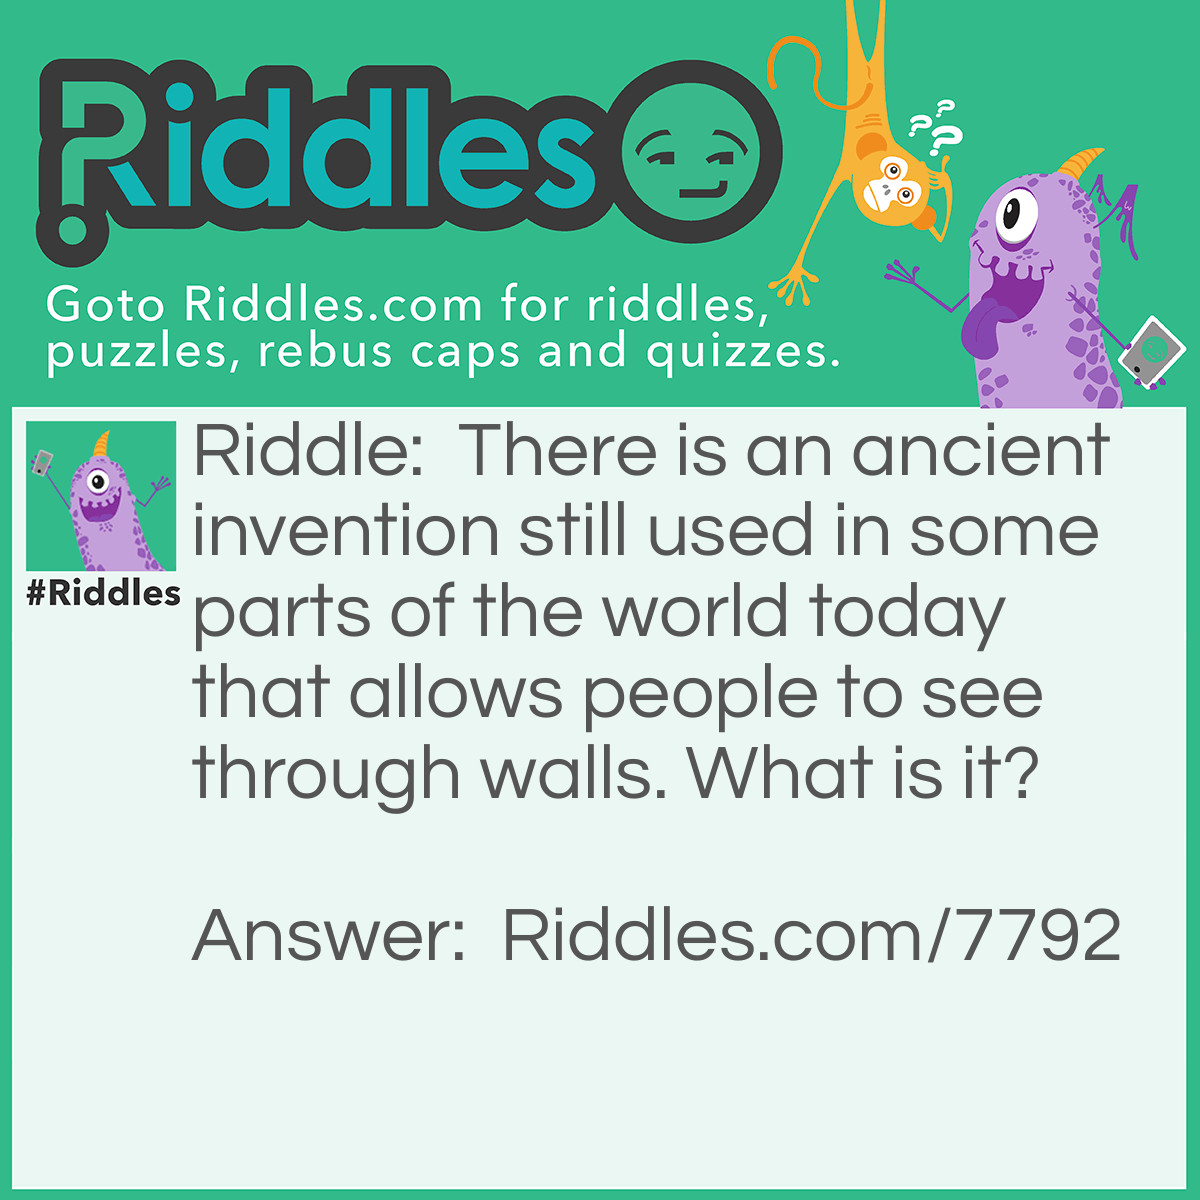 Riddle: There is an ancient invention still used in some parts of the world today that allows people to see through walls. What is it? Answer: A Window.